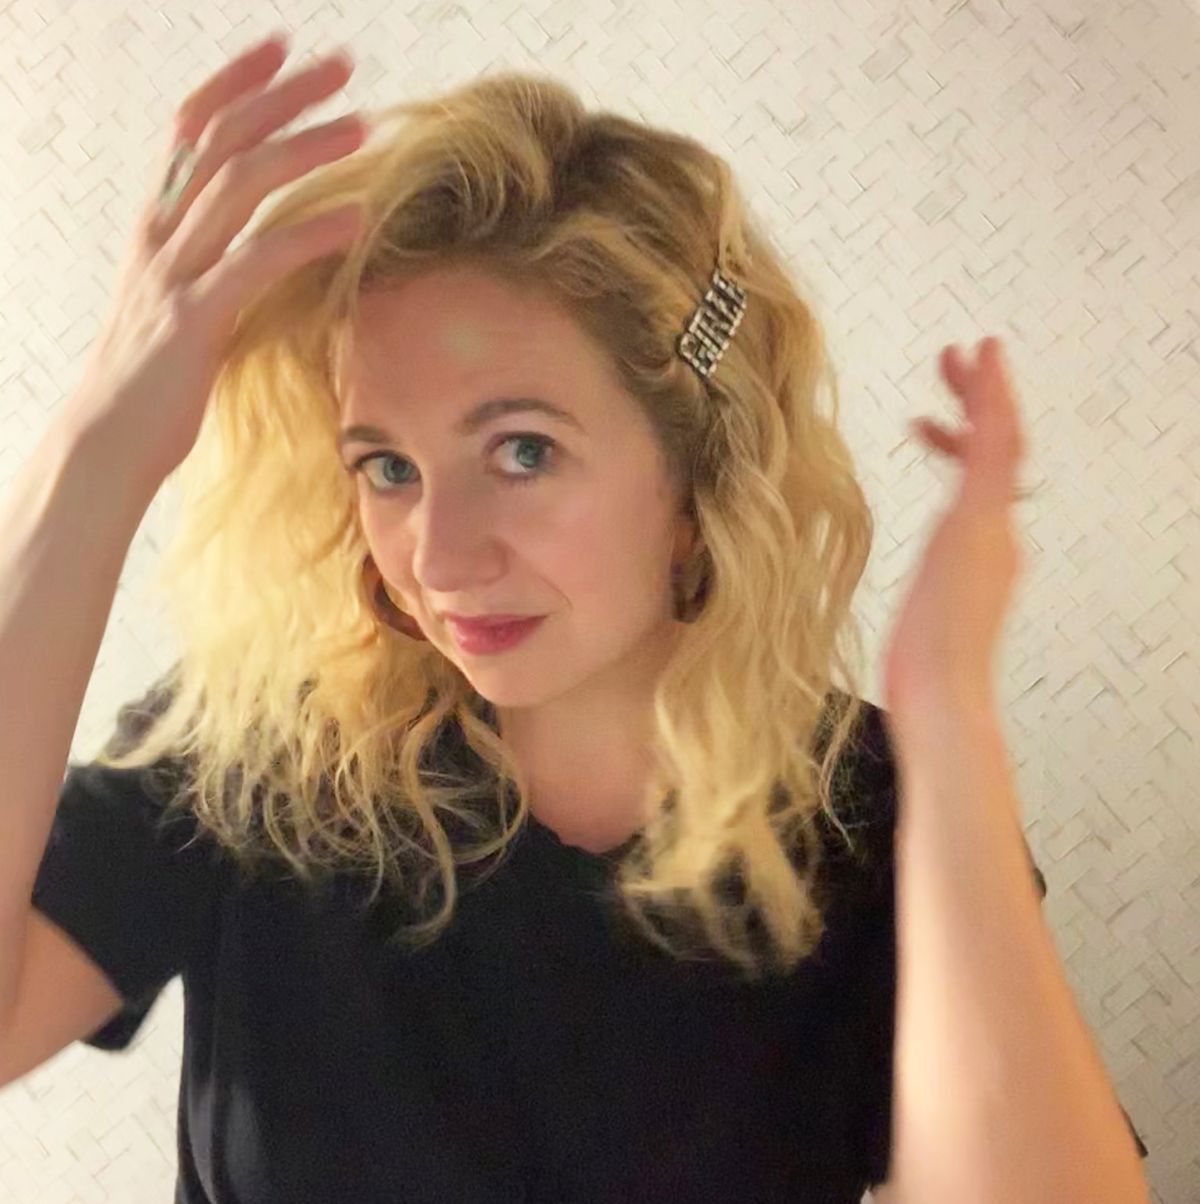 How to Use Hairspray on Curly Hair, According to Celeb Hairstylist